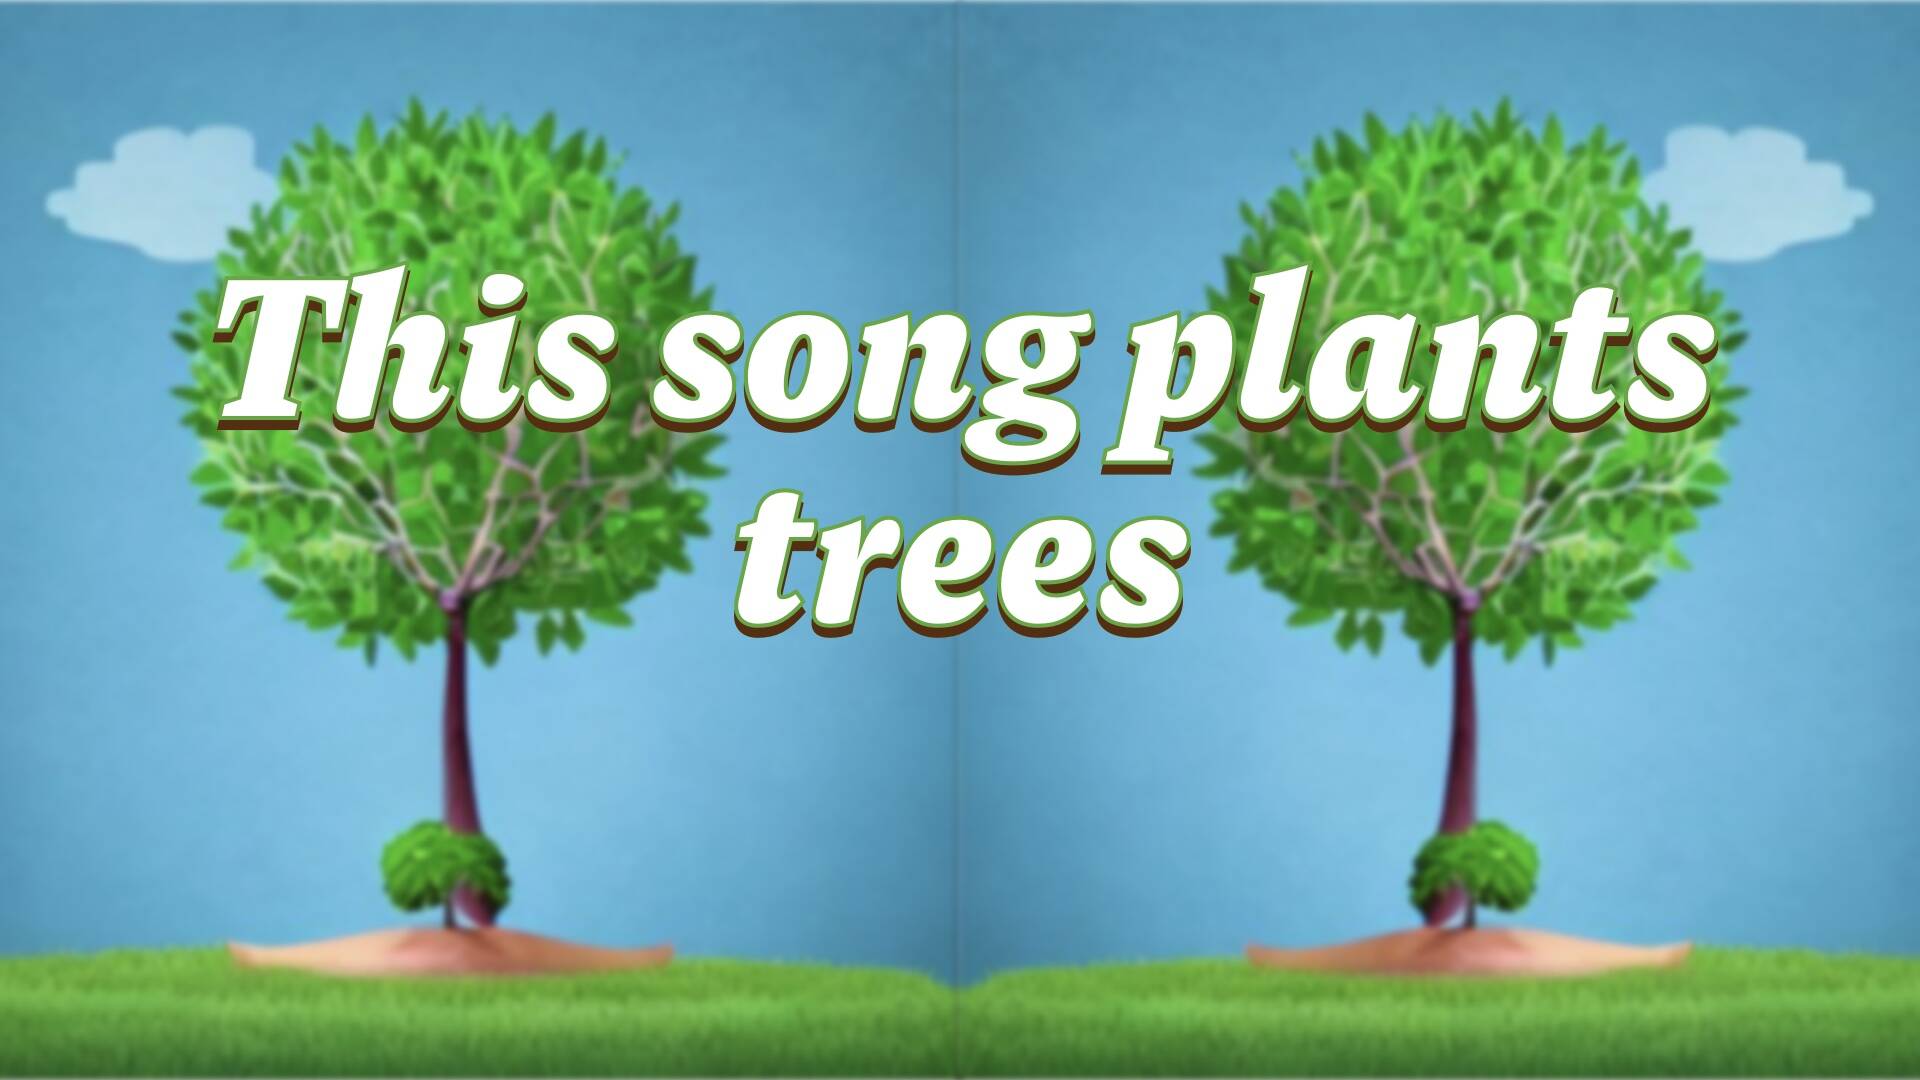 202212141713 daily ad 38 EN- This Song Plants Trees.jpg